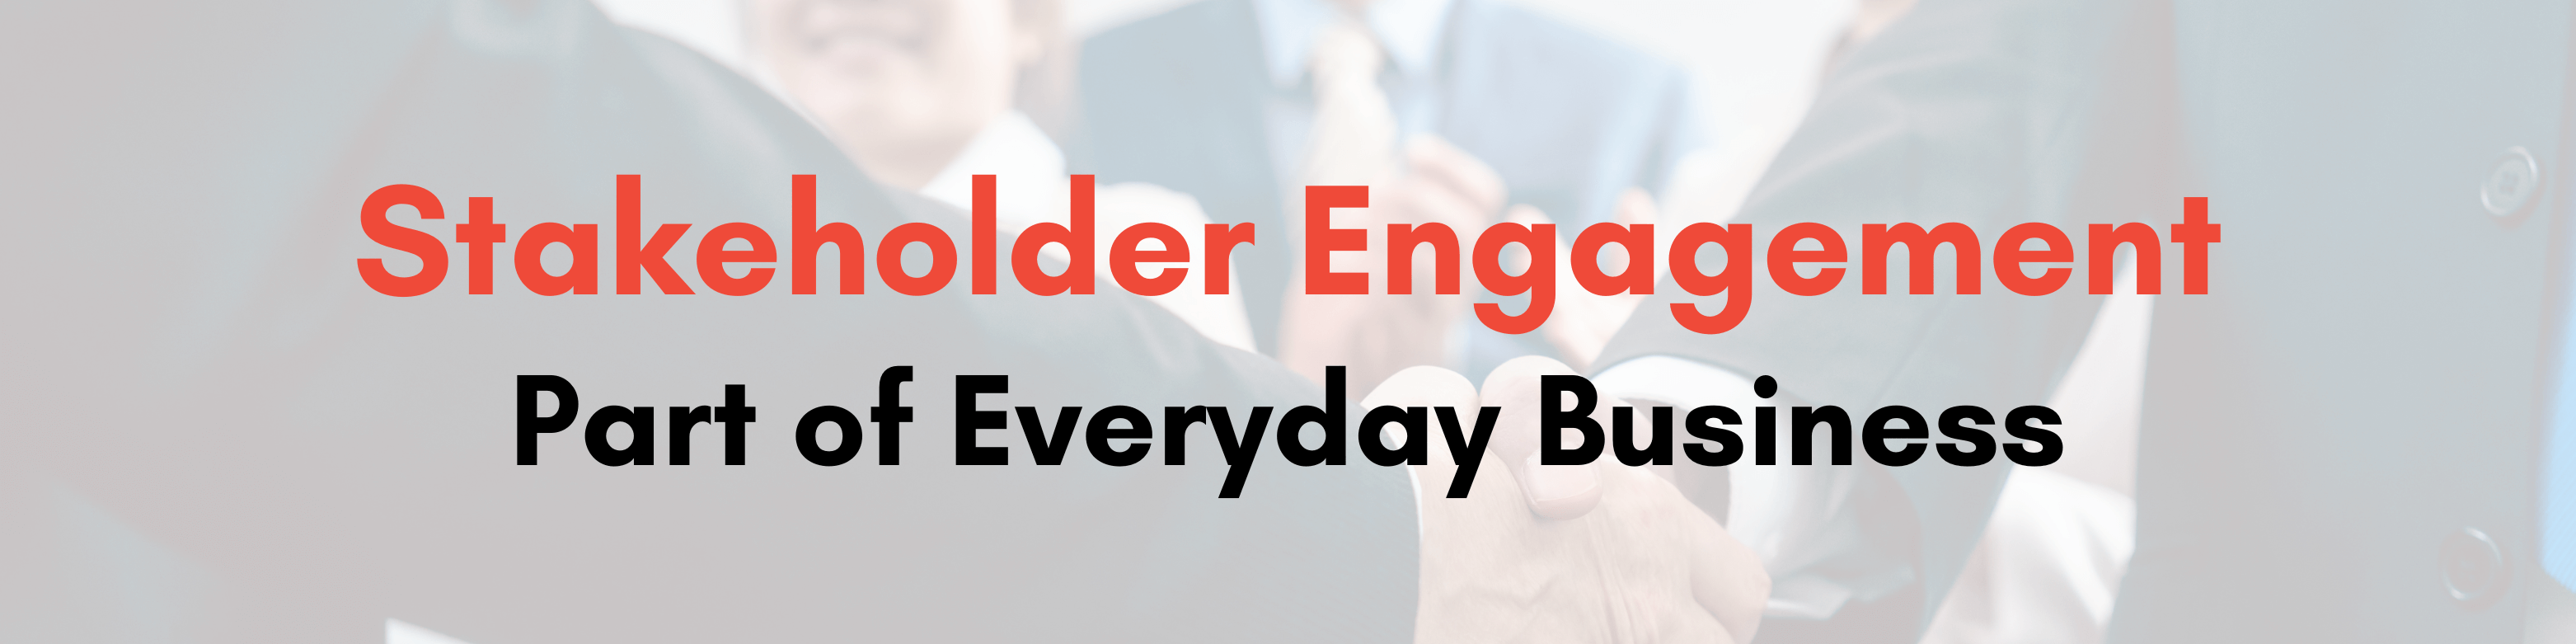 Stakeholder Engagement – Part of Everyday Business